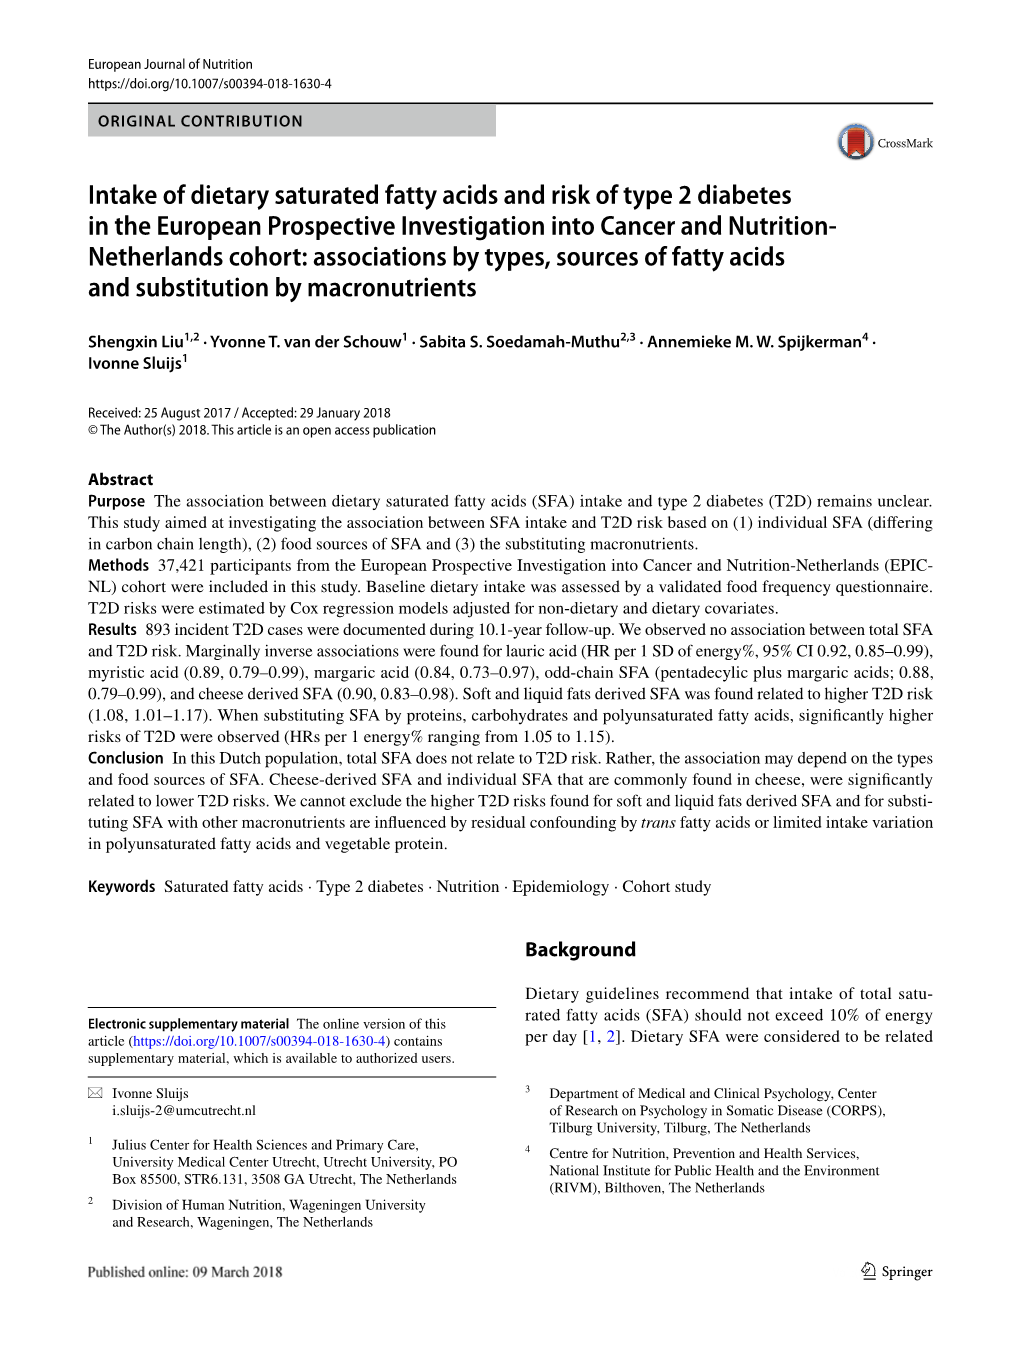 Intake of Dietary Saturated Fatty Acids and Risk of Type 2 Diabetes in The